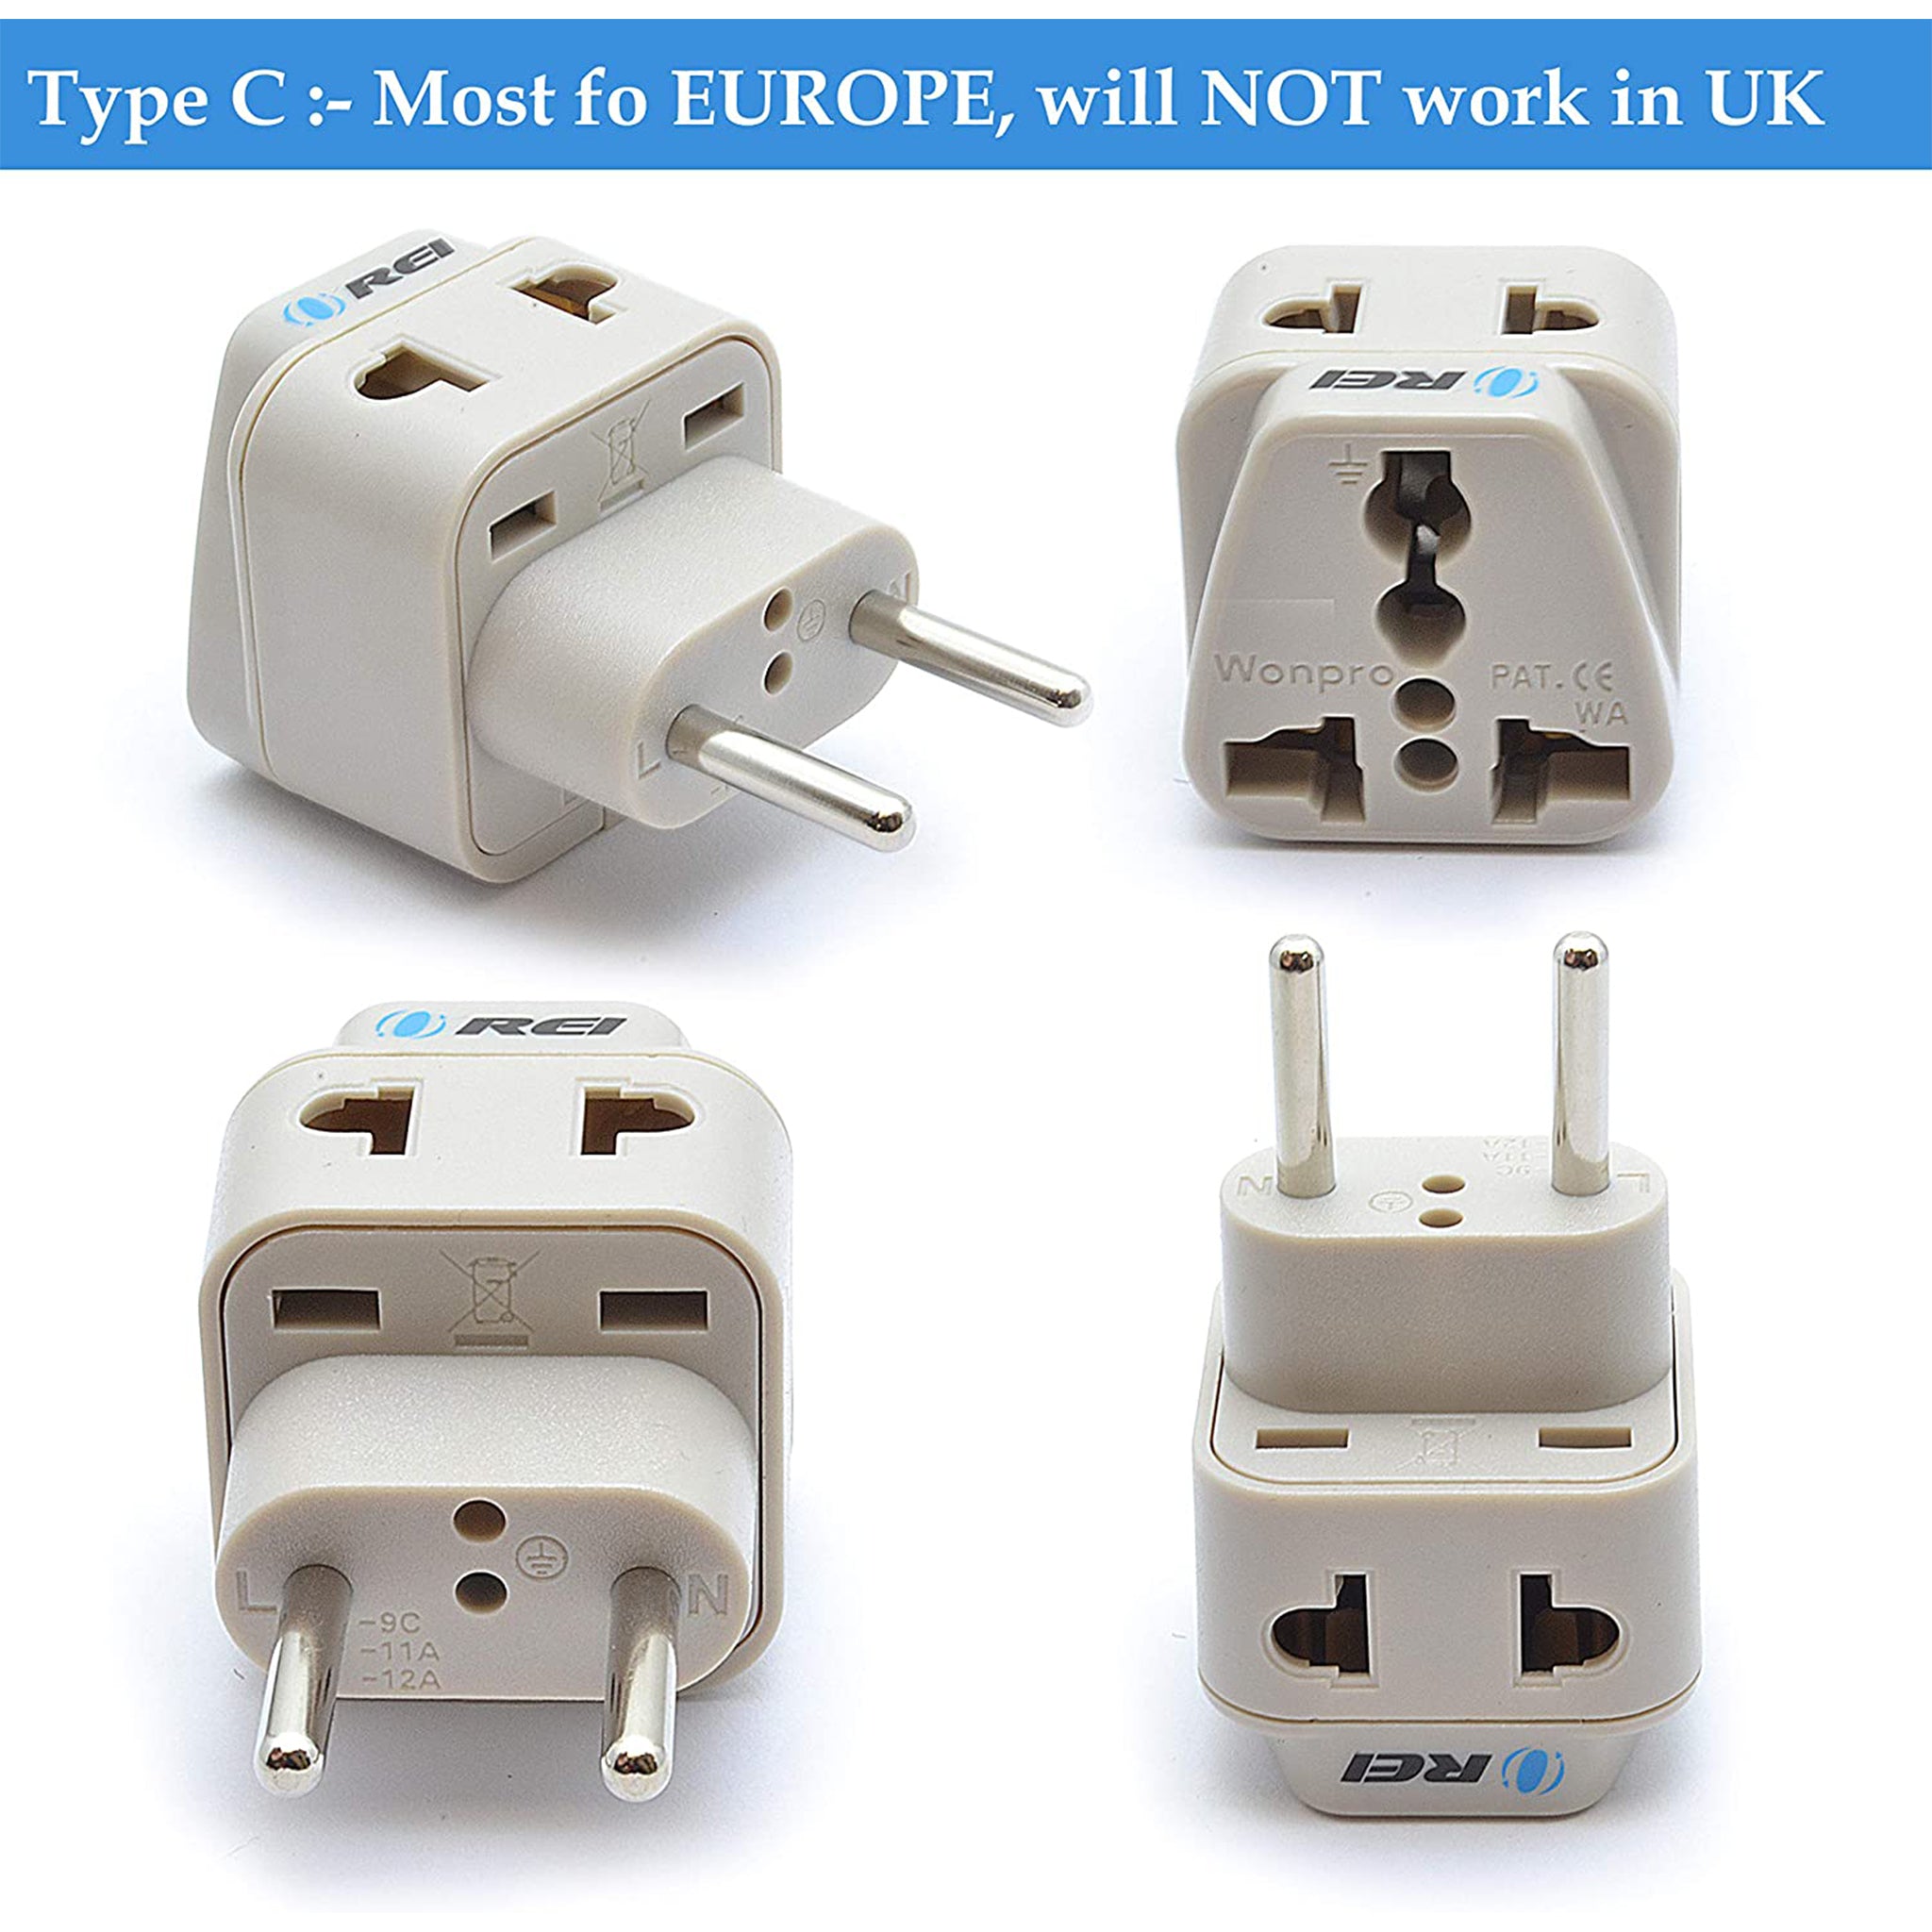 OREI India USA Adapter, India to Universal Travel Adapter for USA, Japan,  Canada Plug Adapter - Type